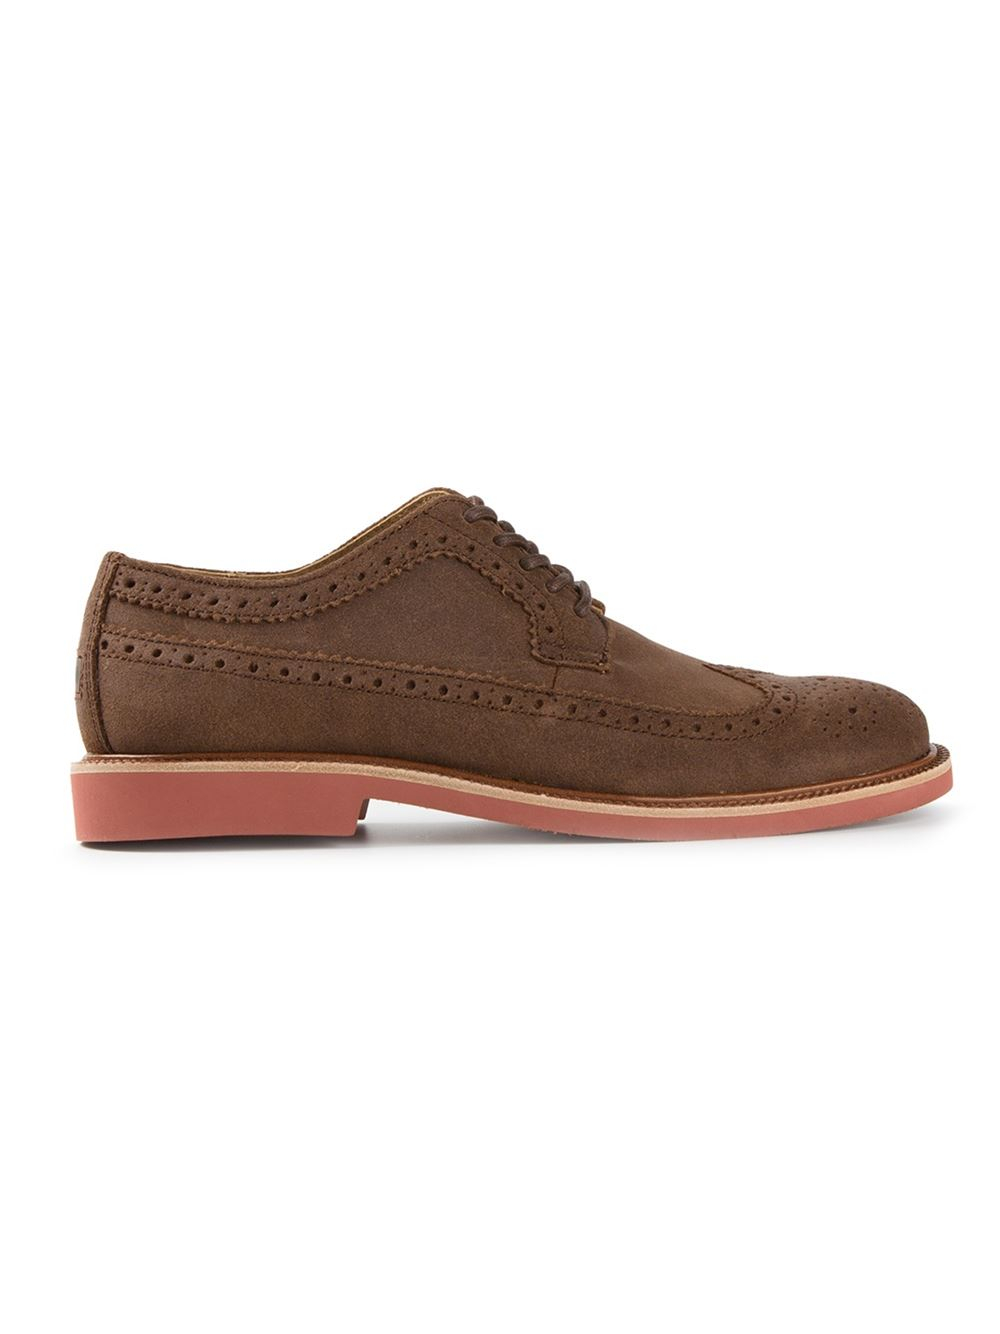 Lyst - Polo Ralph Lauren Brogue Derby Shoes in Brown for Men